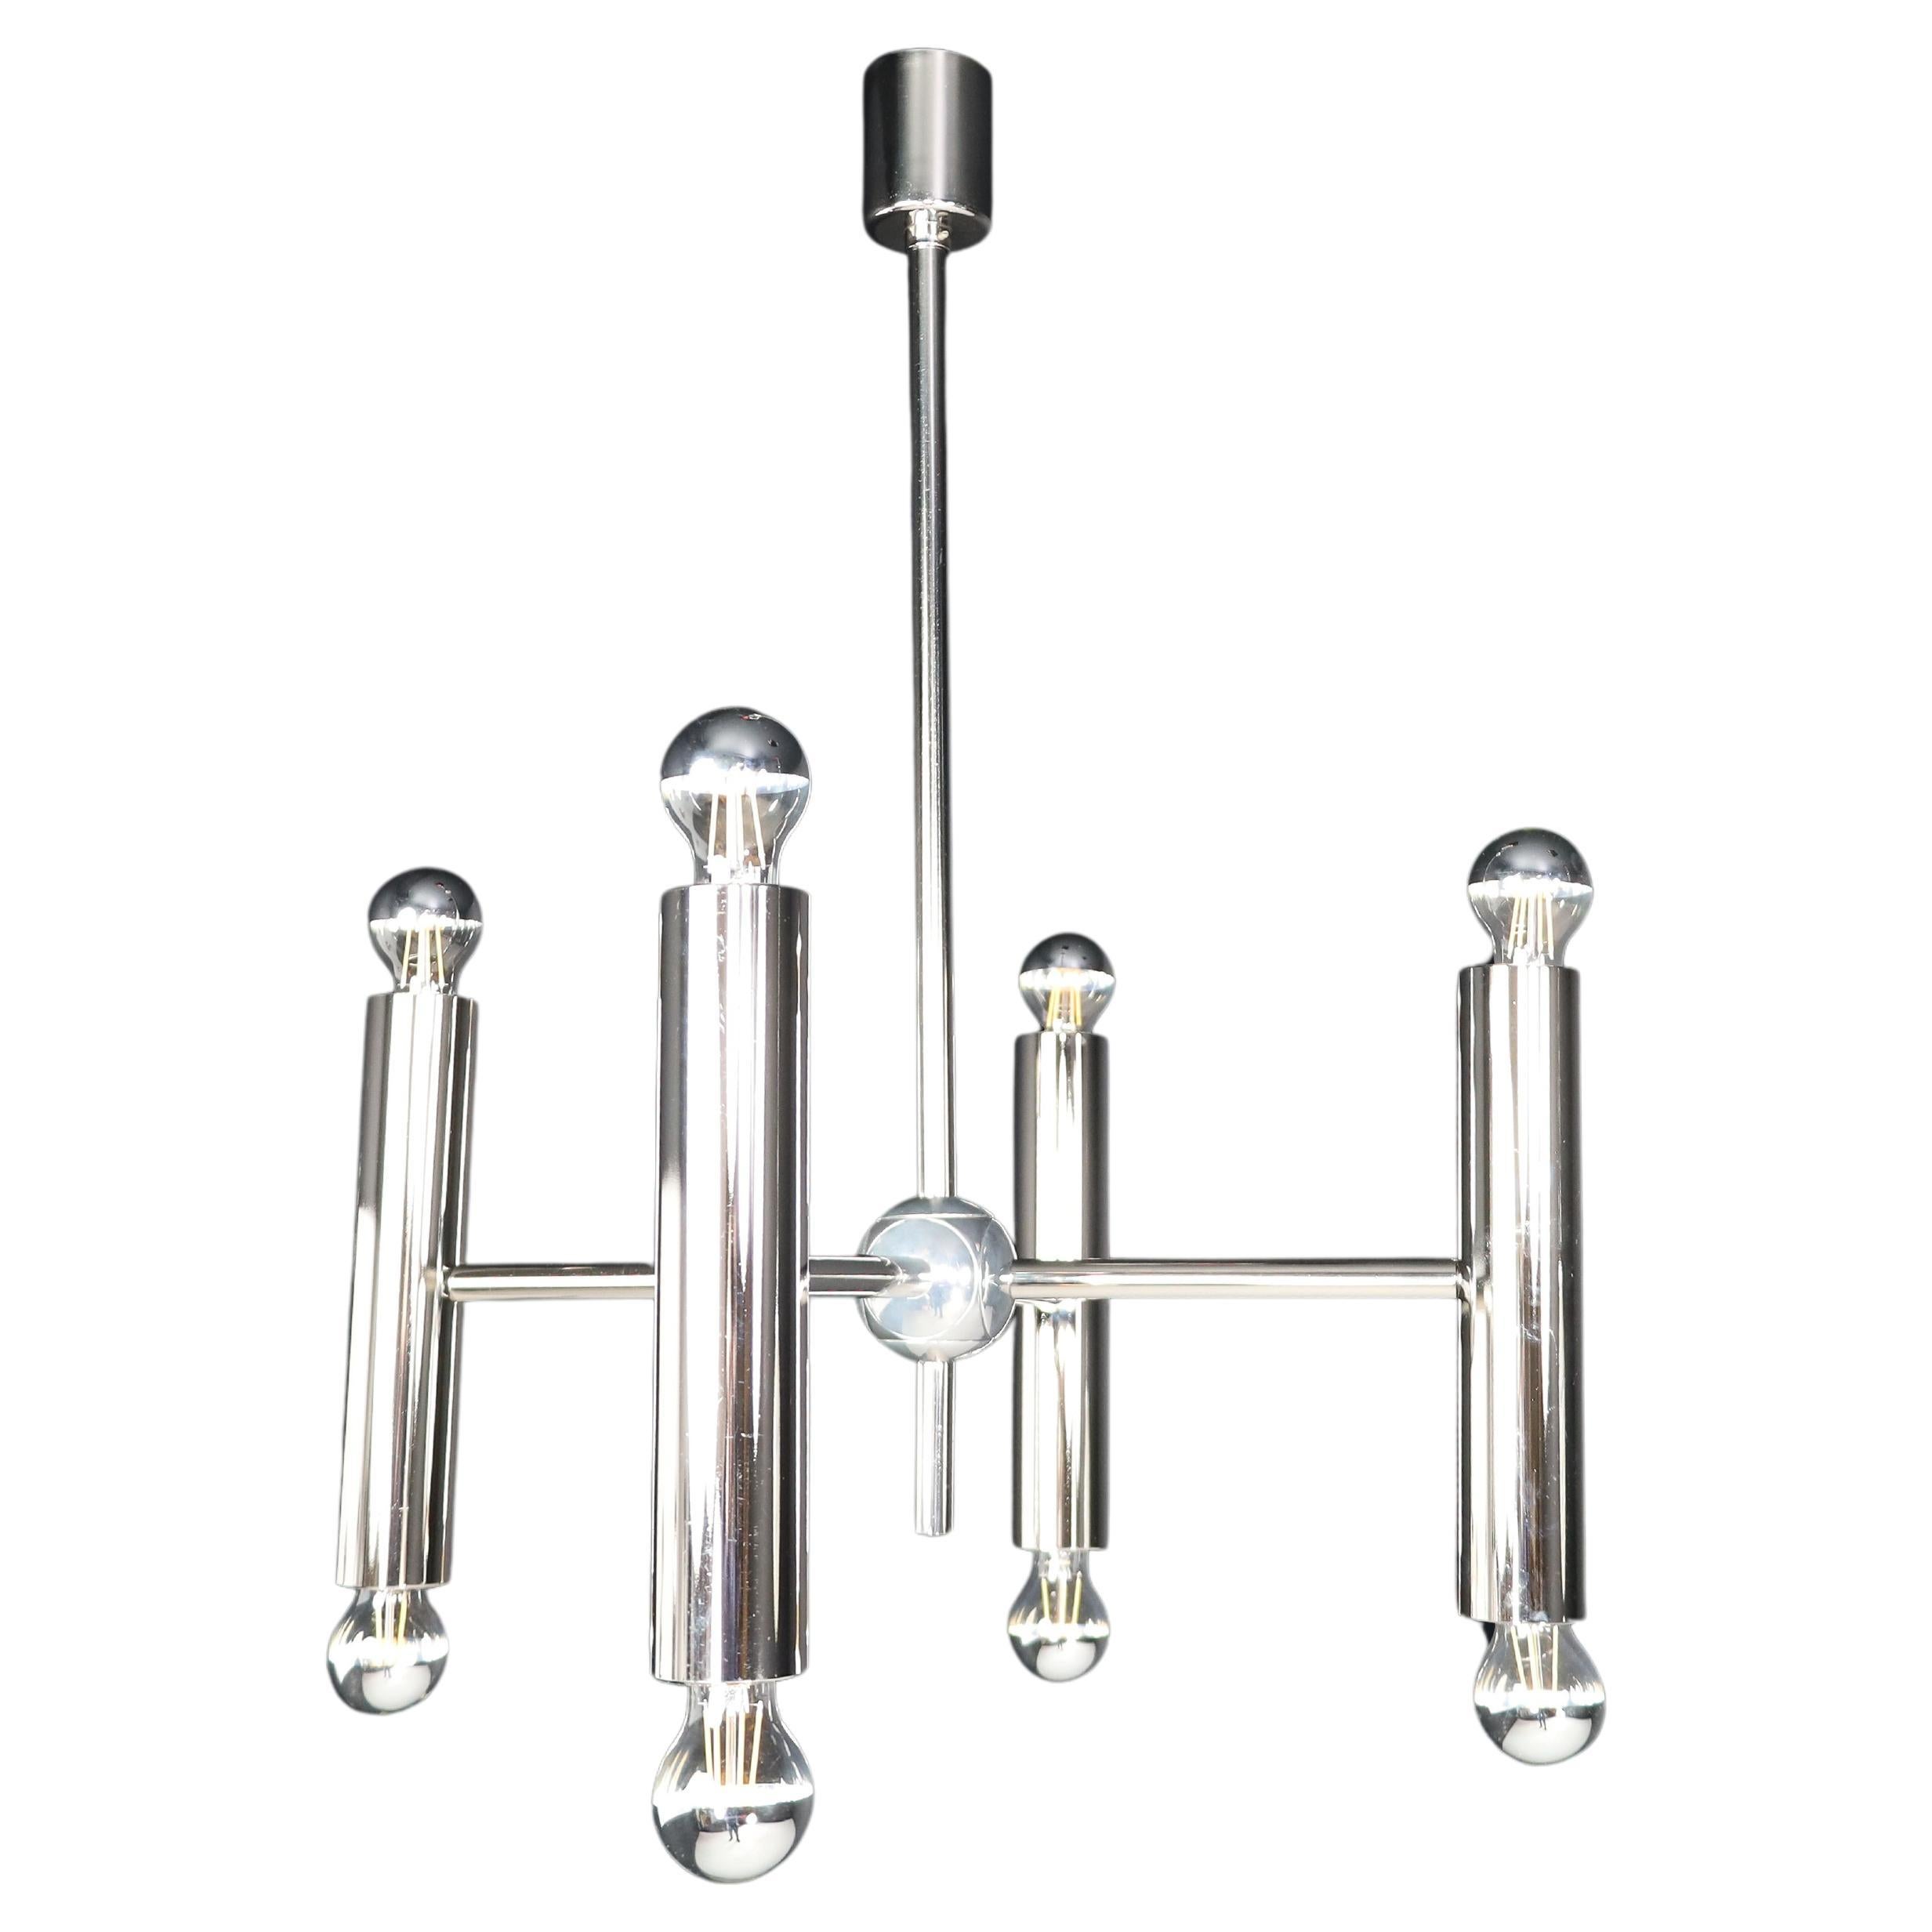 Mid-Century Modern chandelier in polished steel with Eight lights, Germany 1960